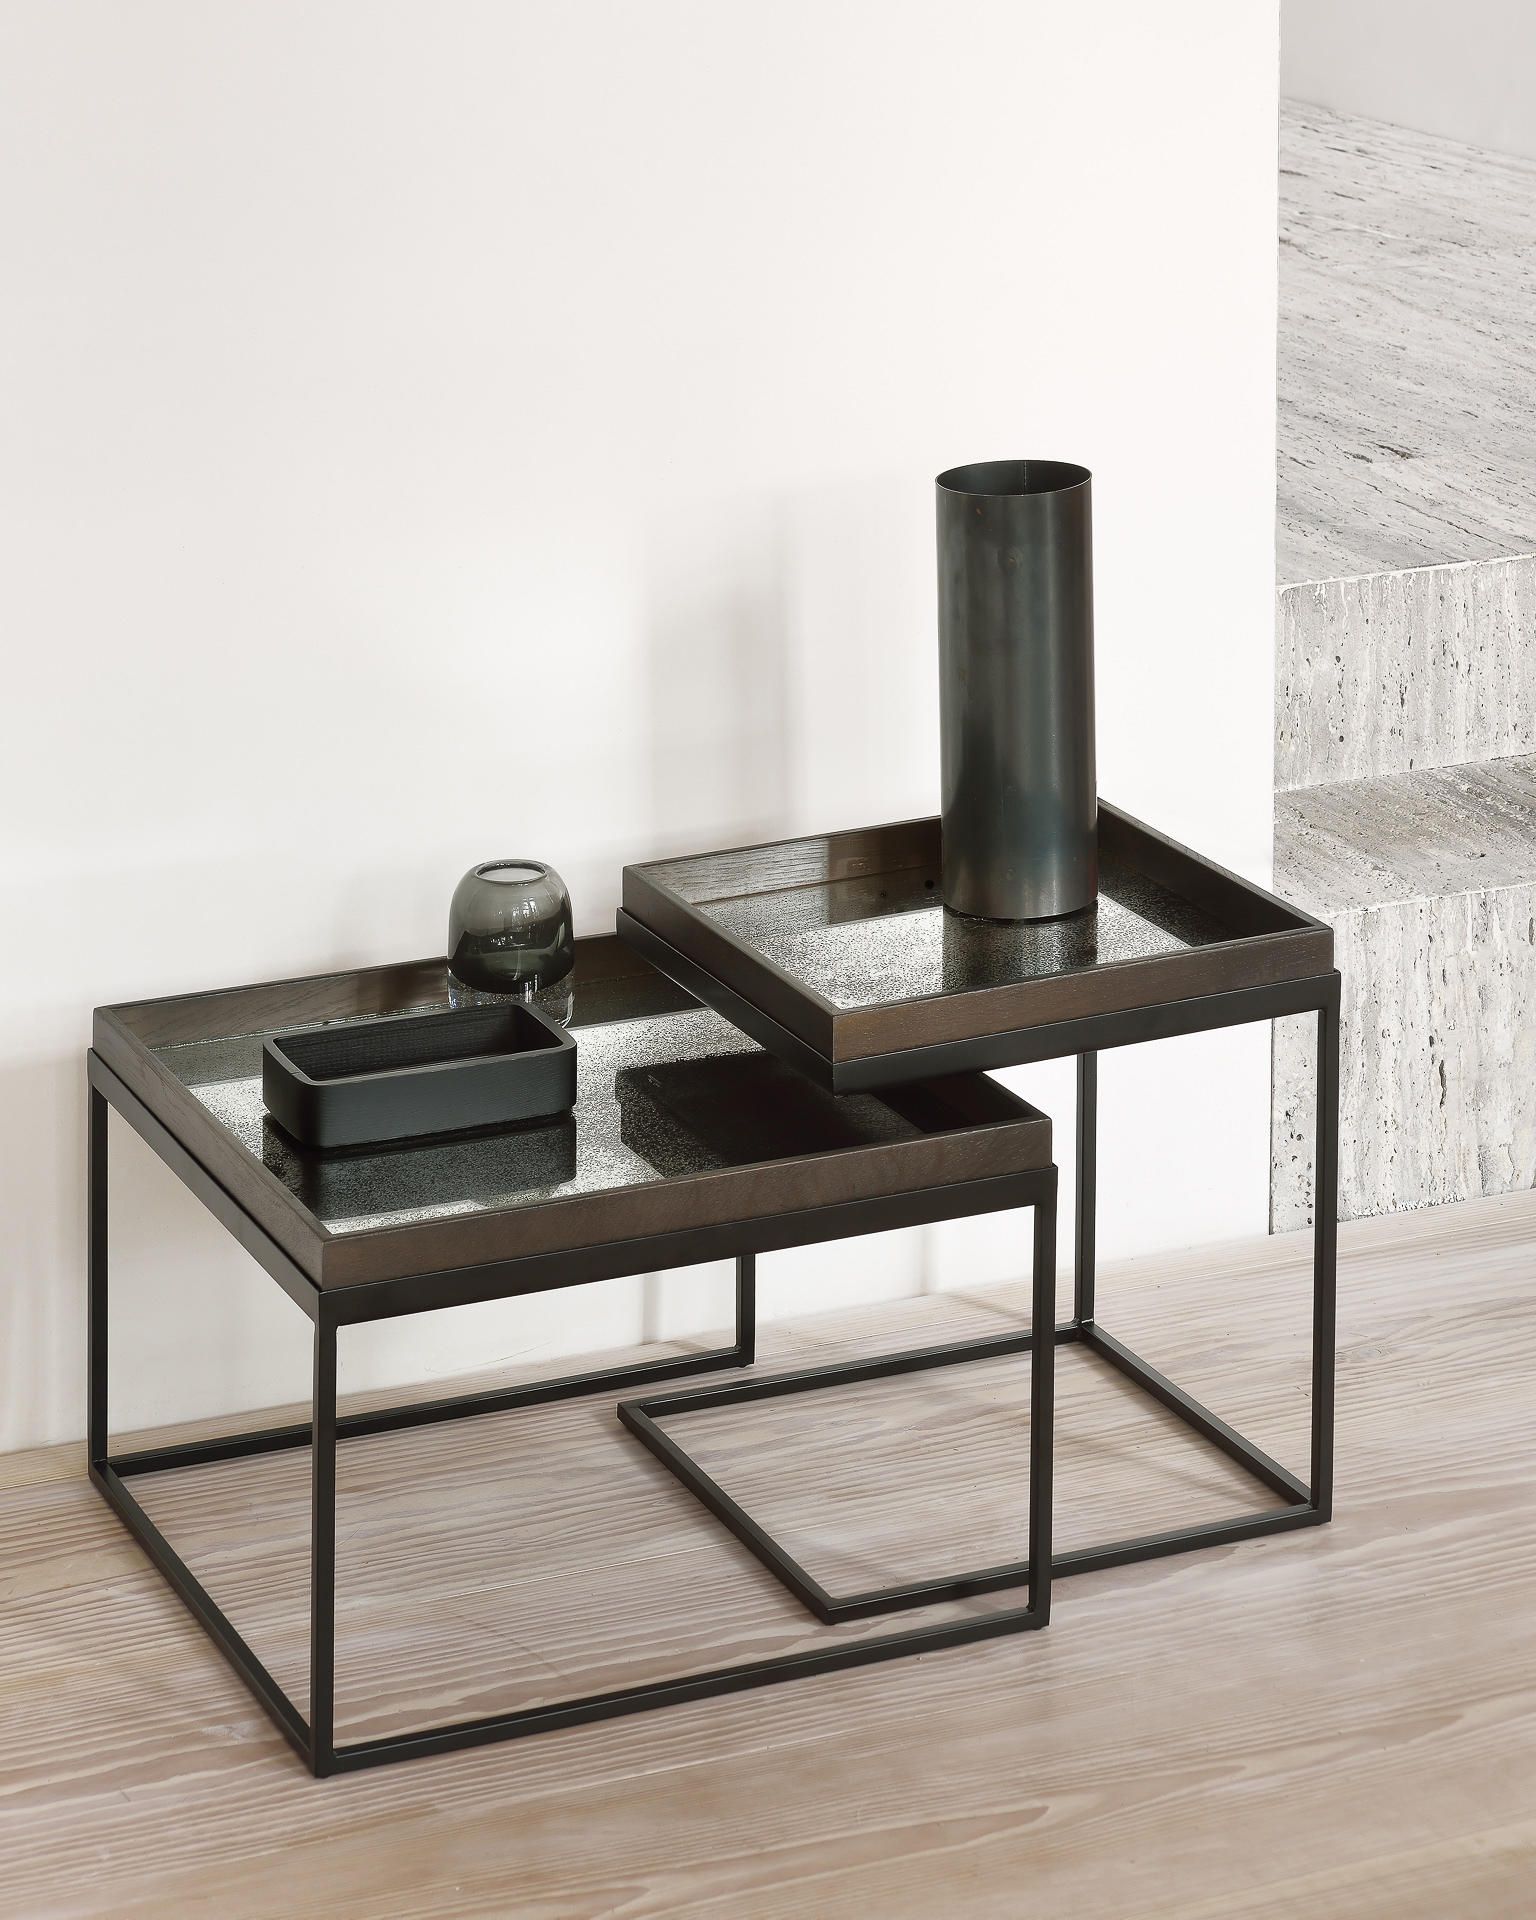 Tray Tables | Square Tray Coffee Table Set – S/l (trays Not Included) |  Architonic With Regard To Coffee Tables With Trays (View 14 of 15)